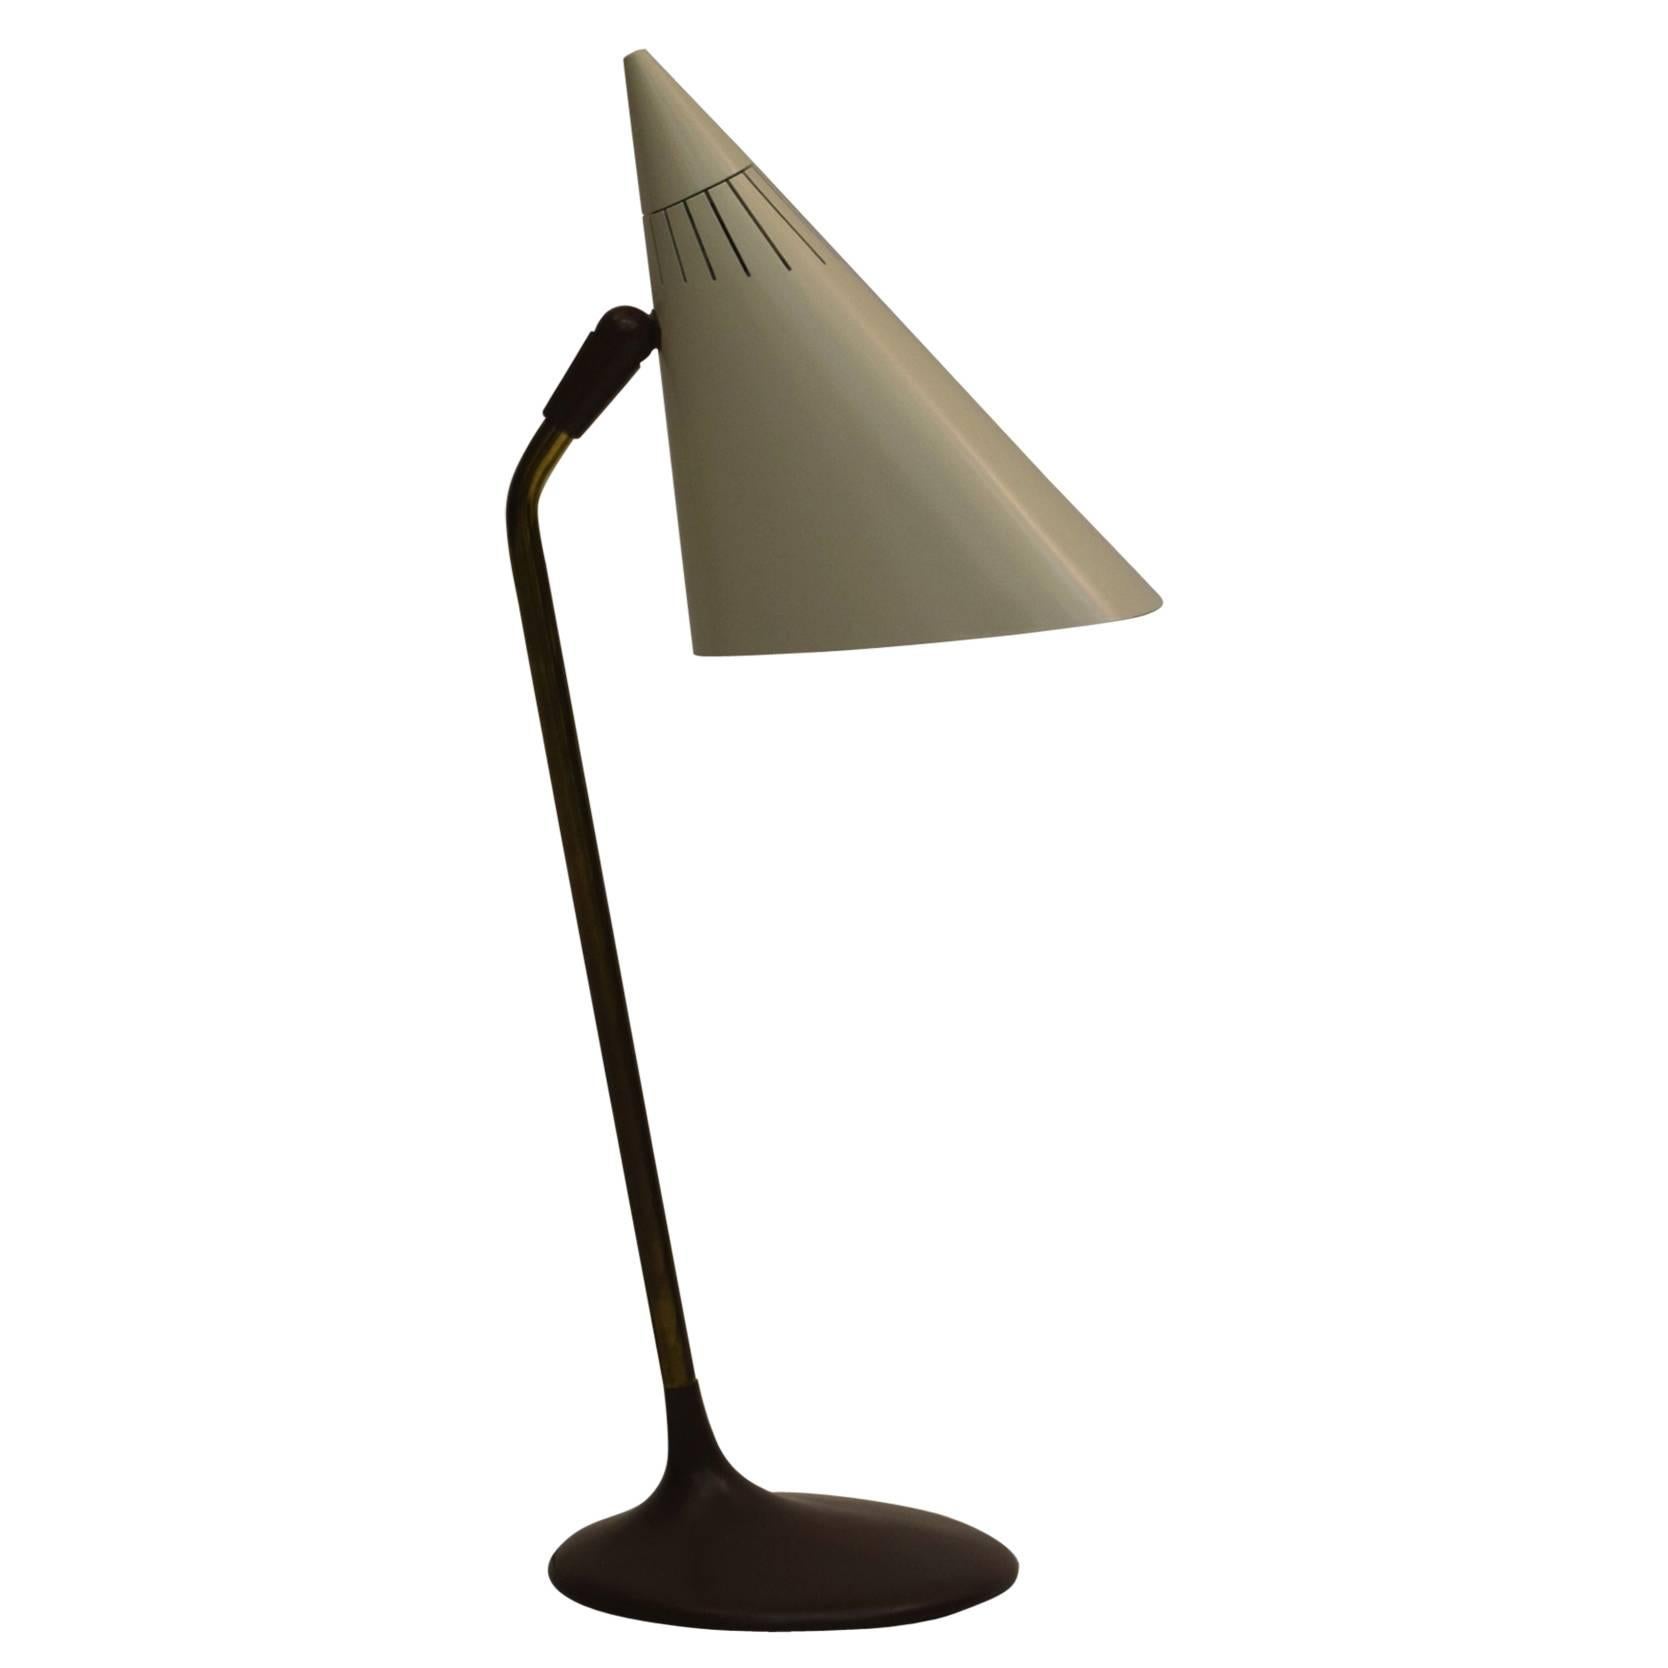 Modernist Table or Desk Lamp by Lightolier with Triangular Shade